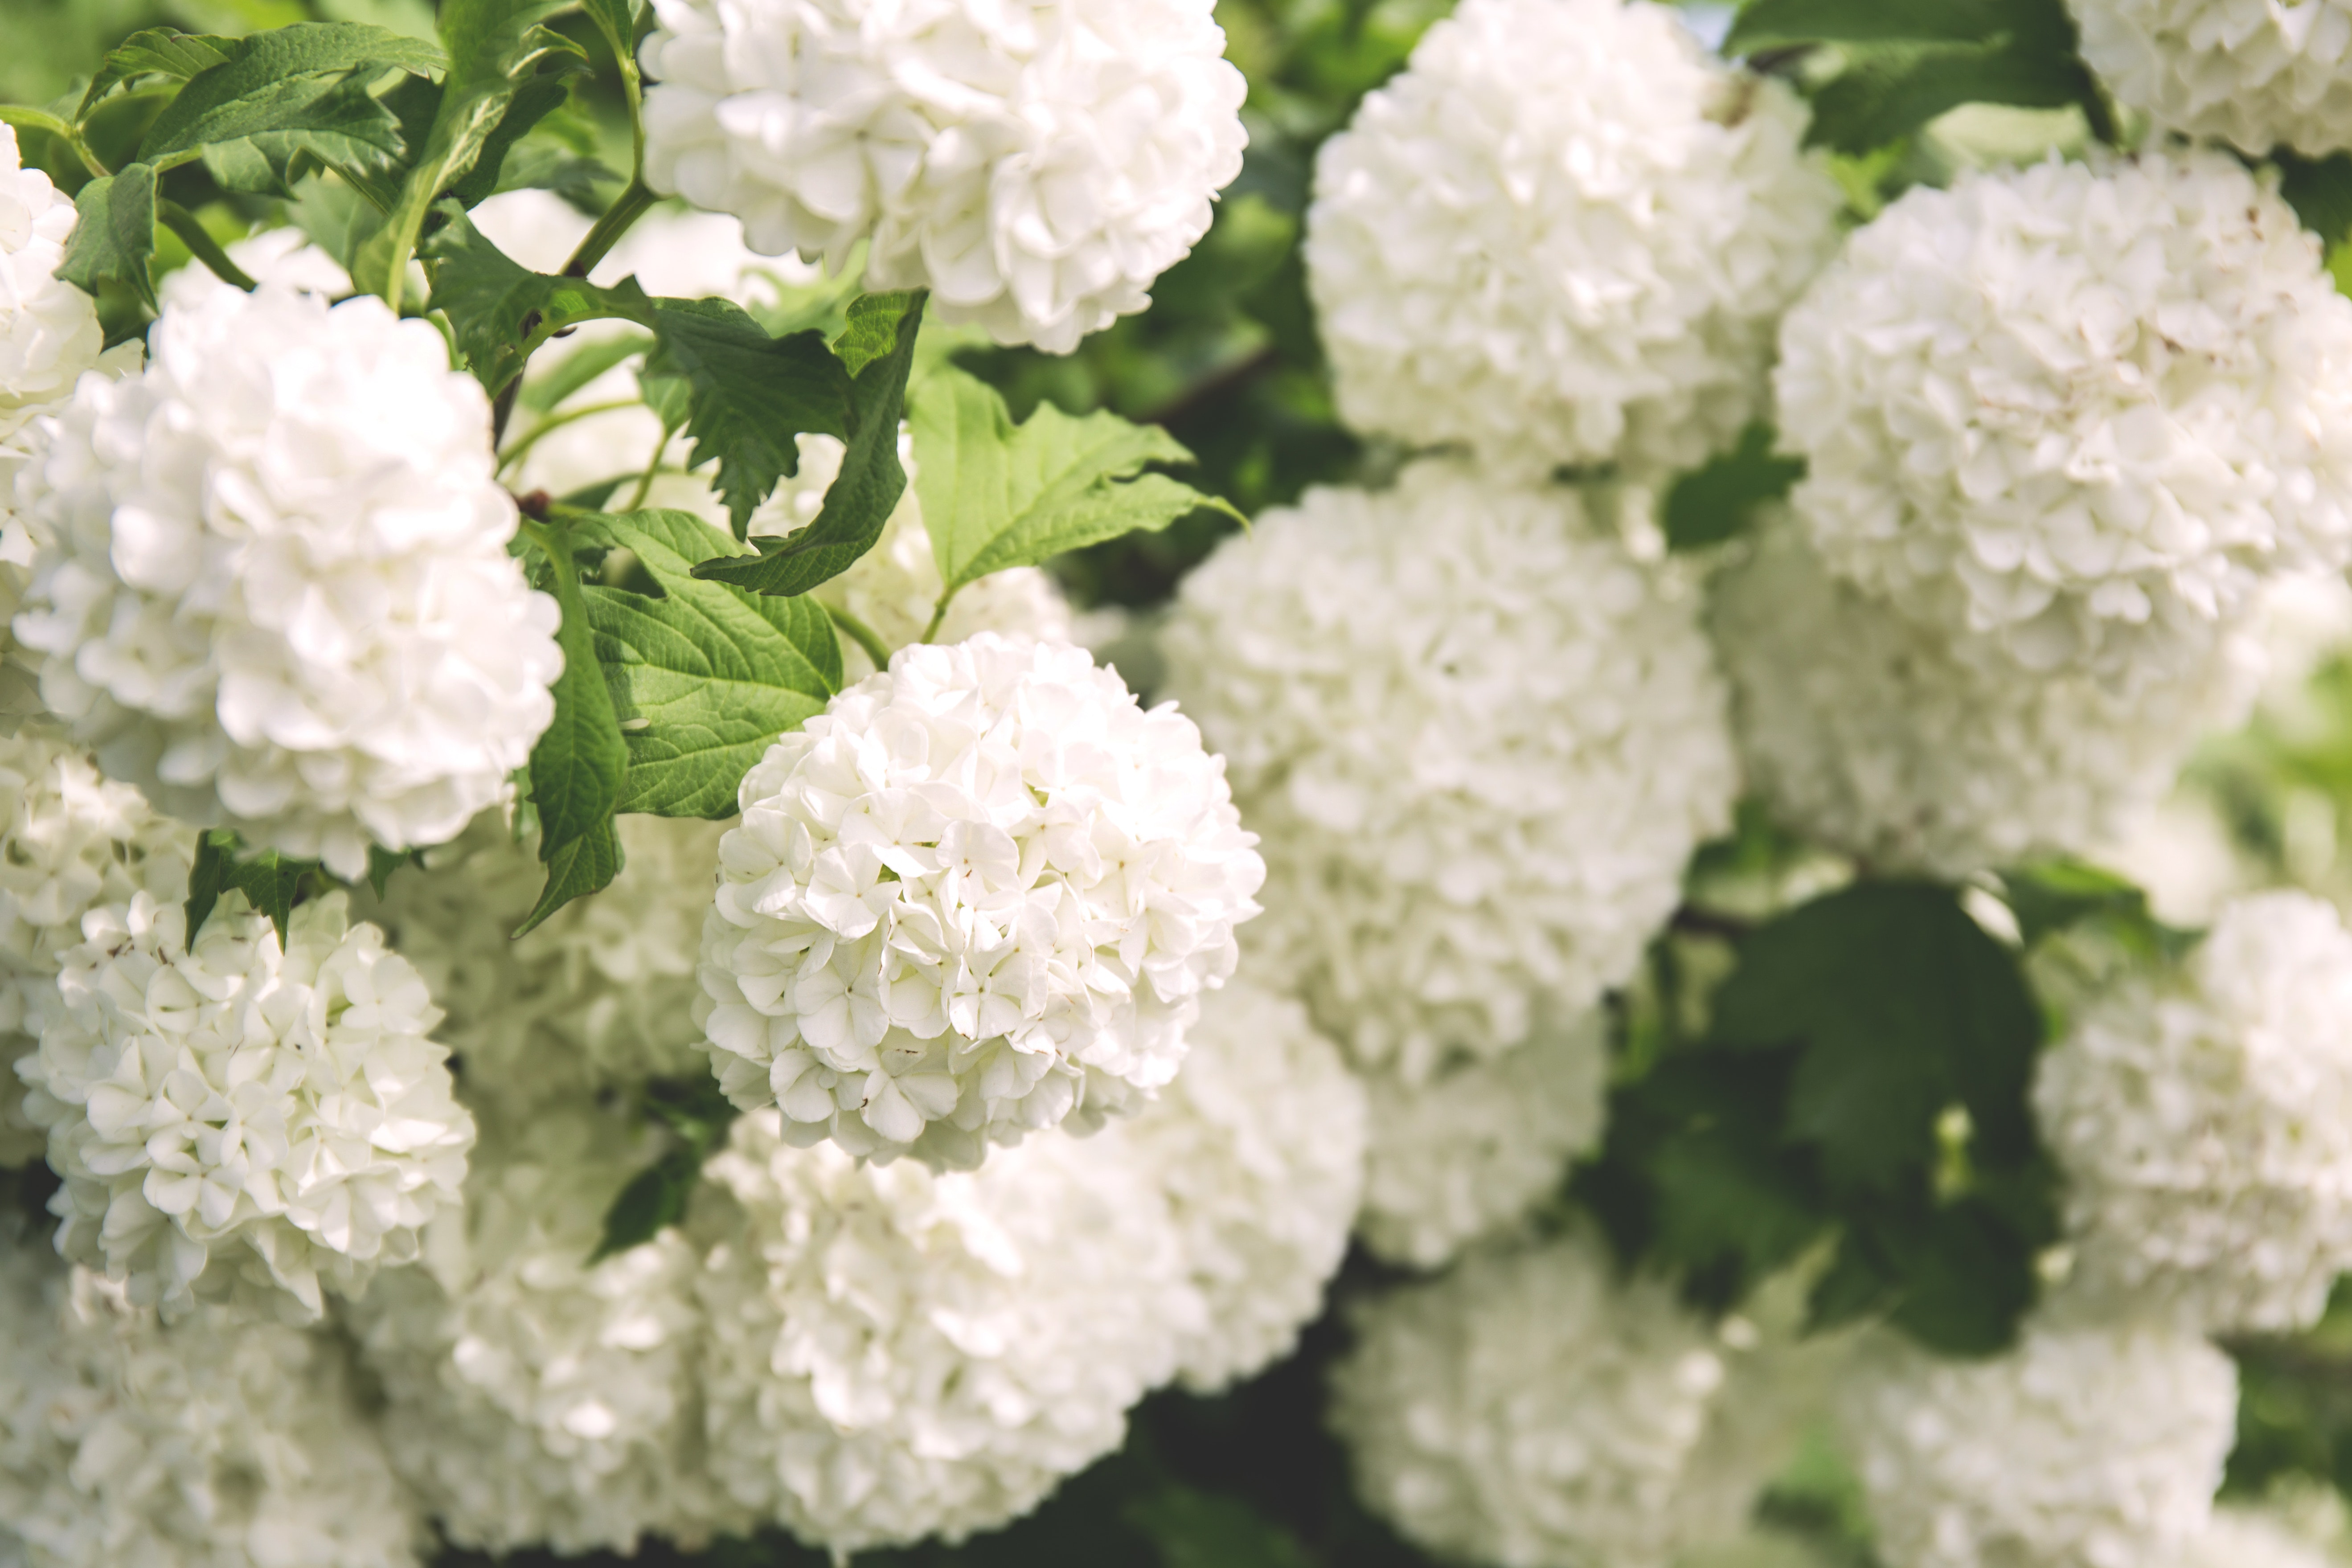 White clustered flowers with green leaves photo